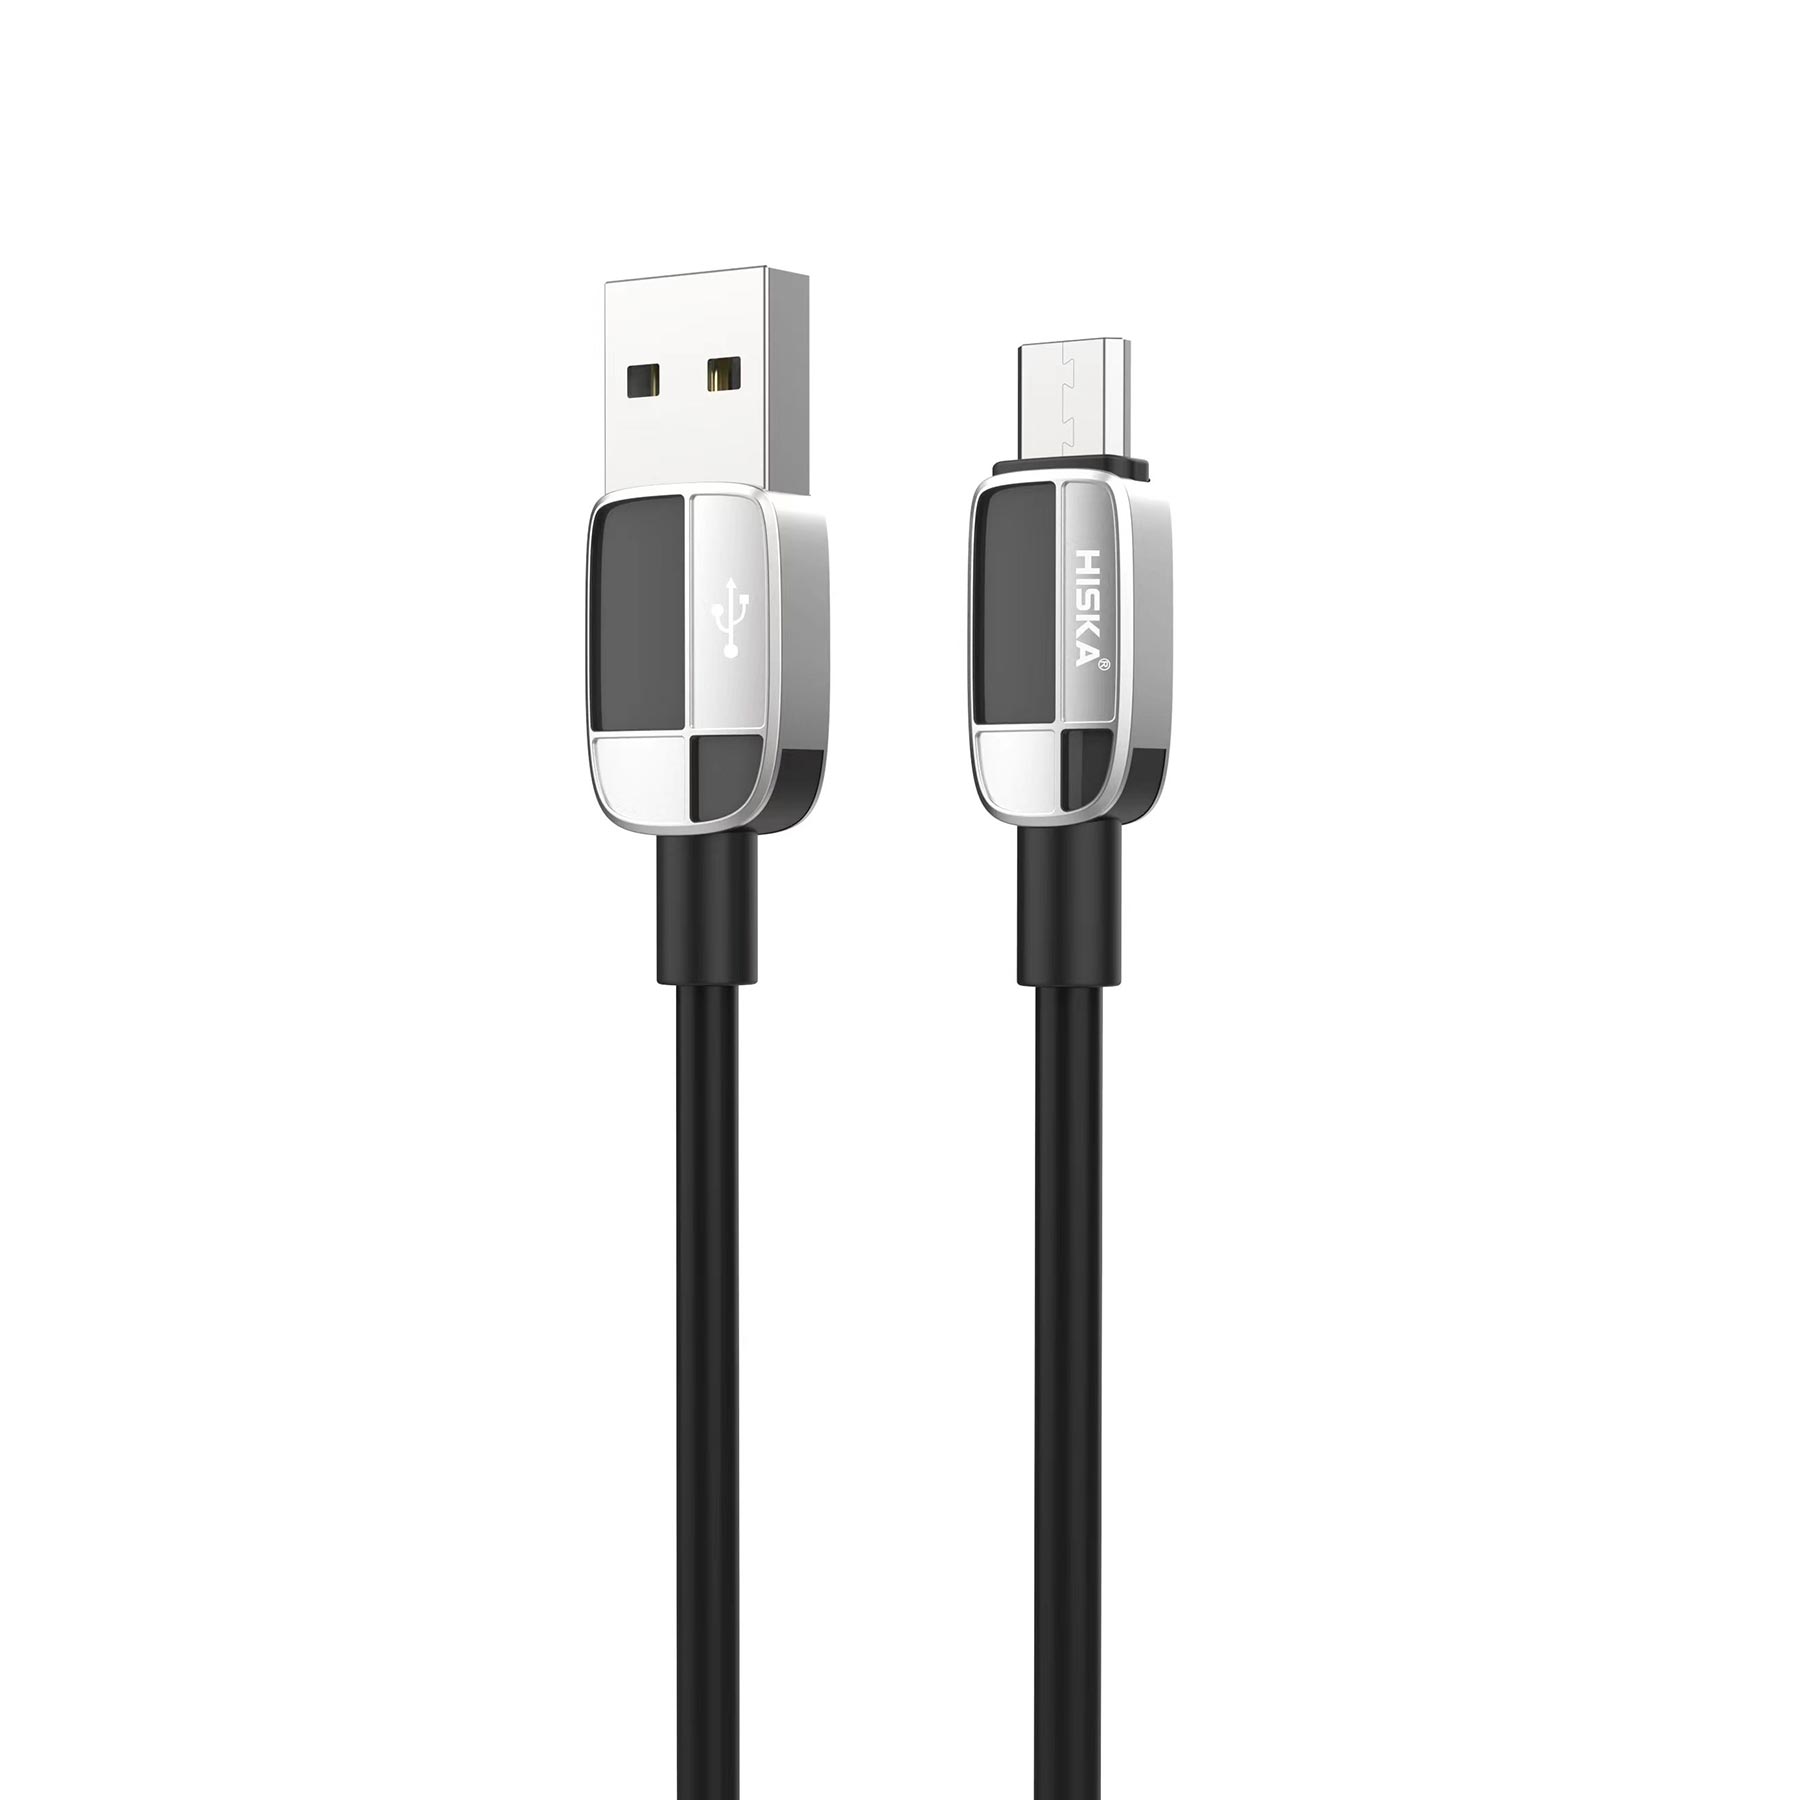 HP-K392 Charging cable LX833